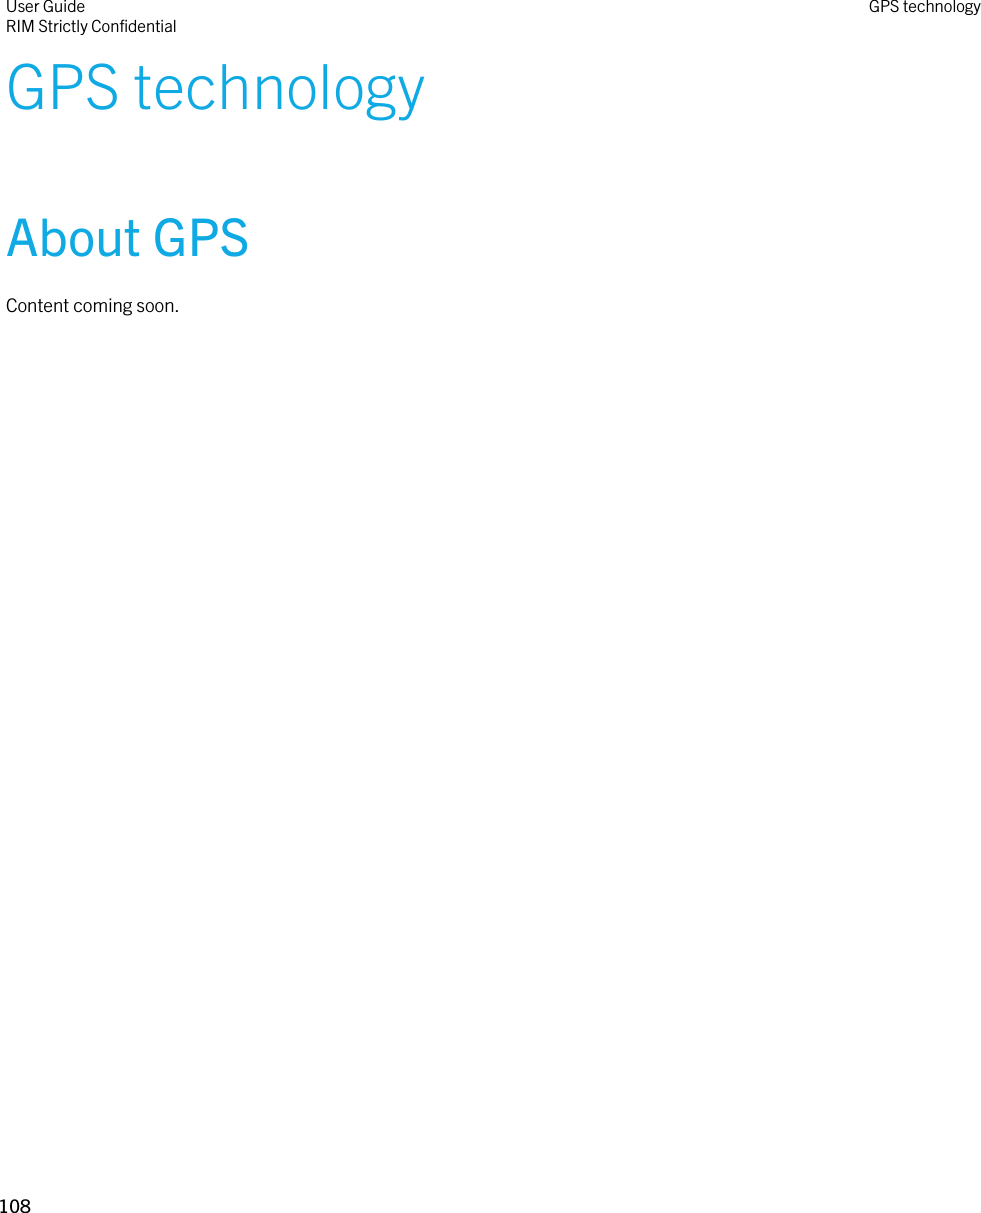 GPS technologyAbout GPSContent coming soon.User GuideRIM Strictly ConfidentialGPS technology108 